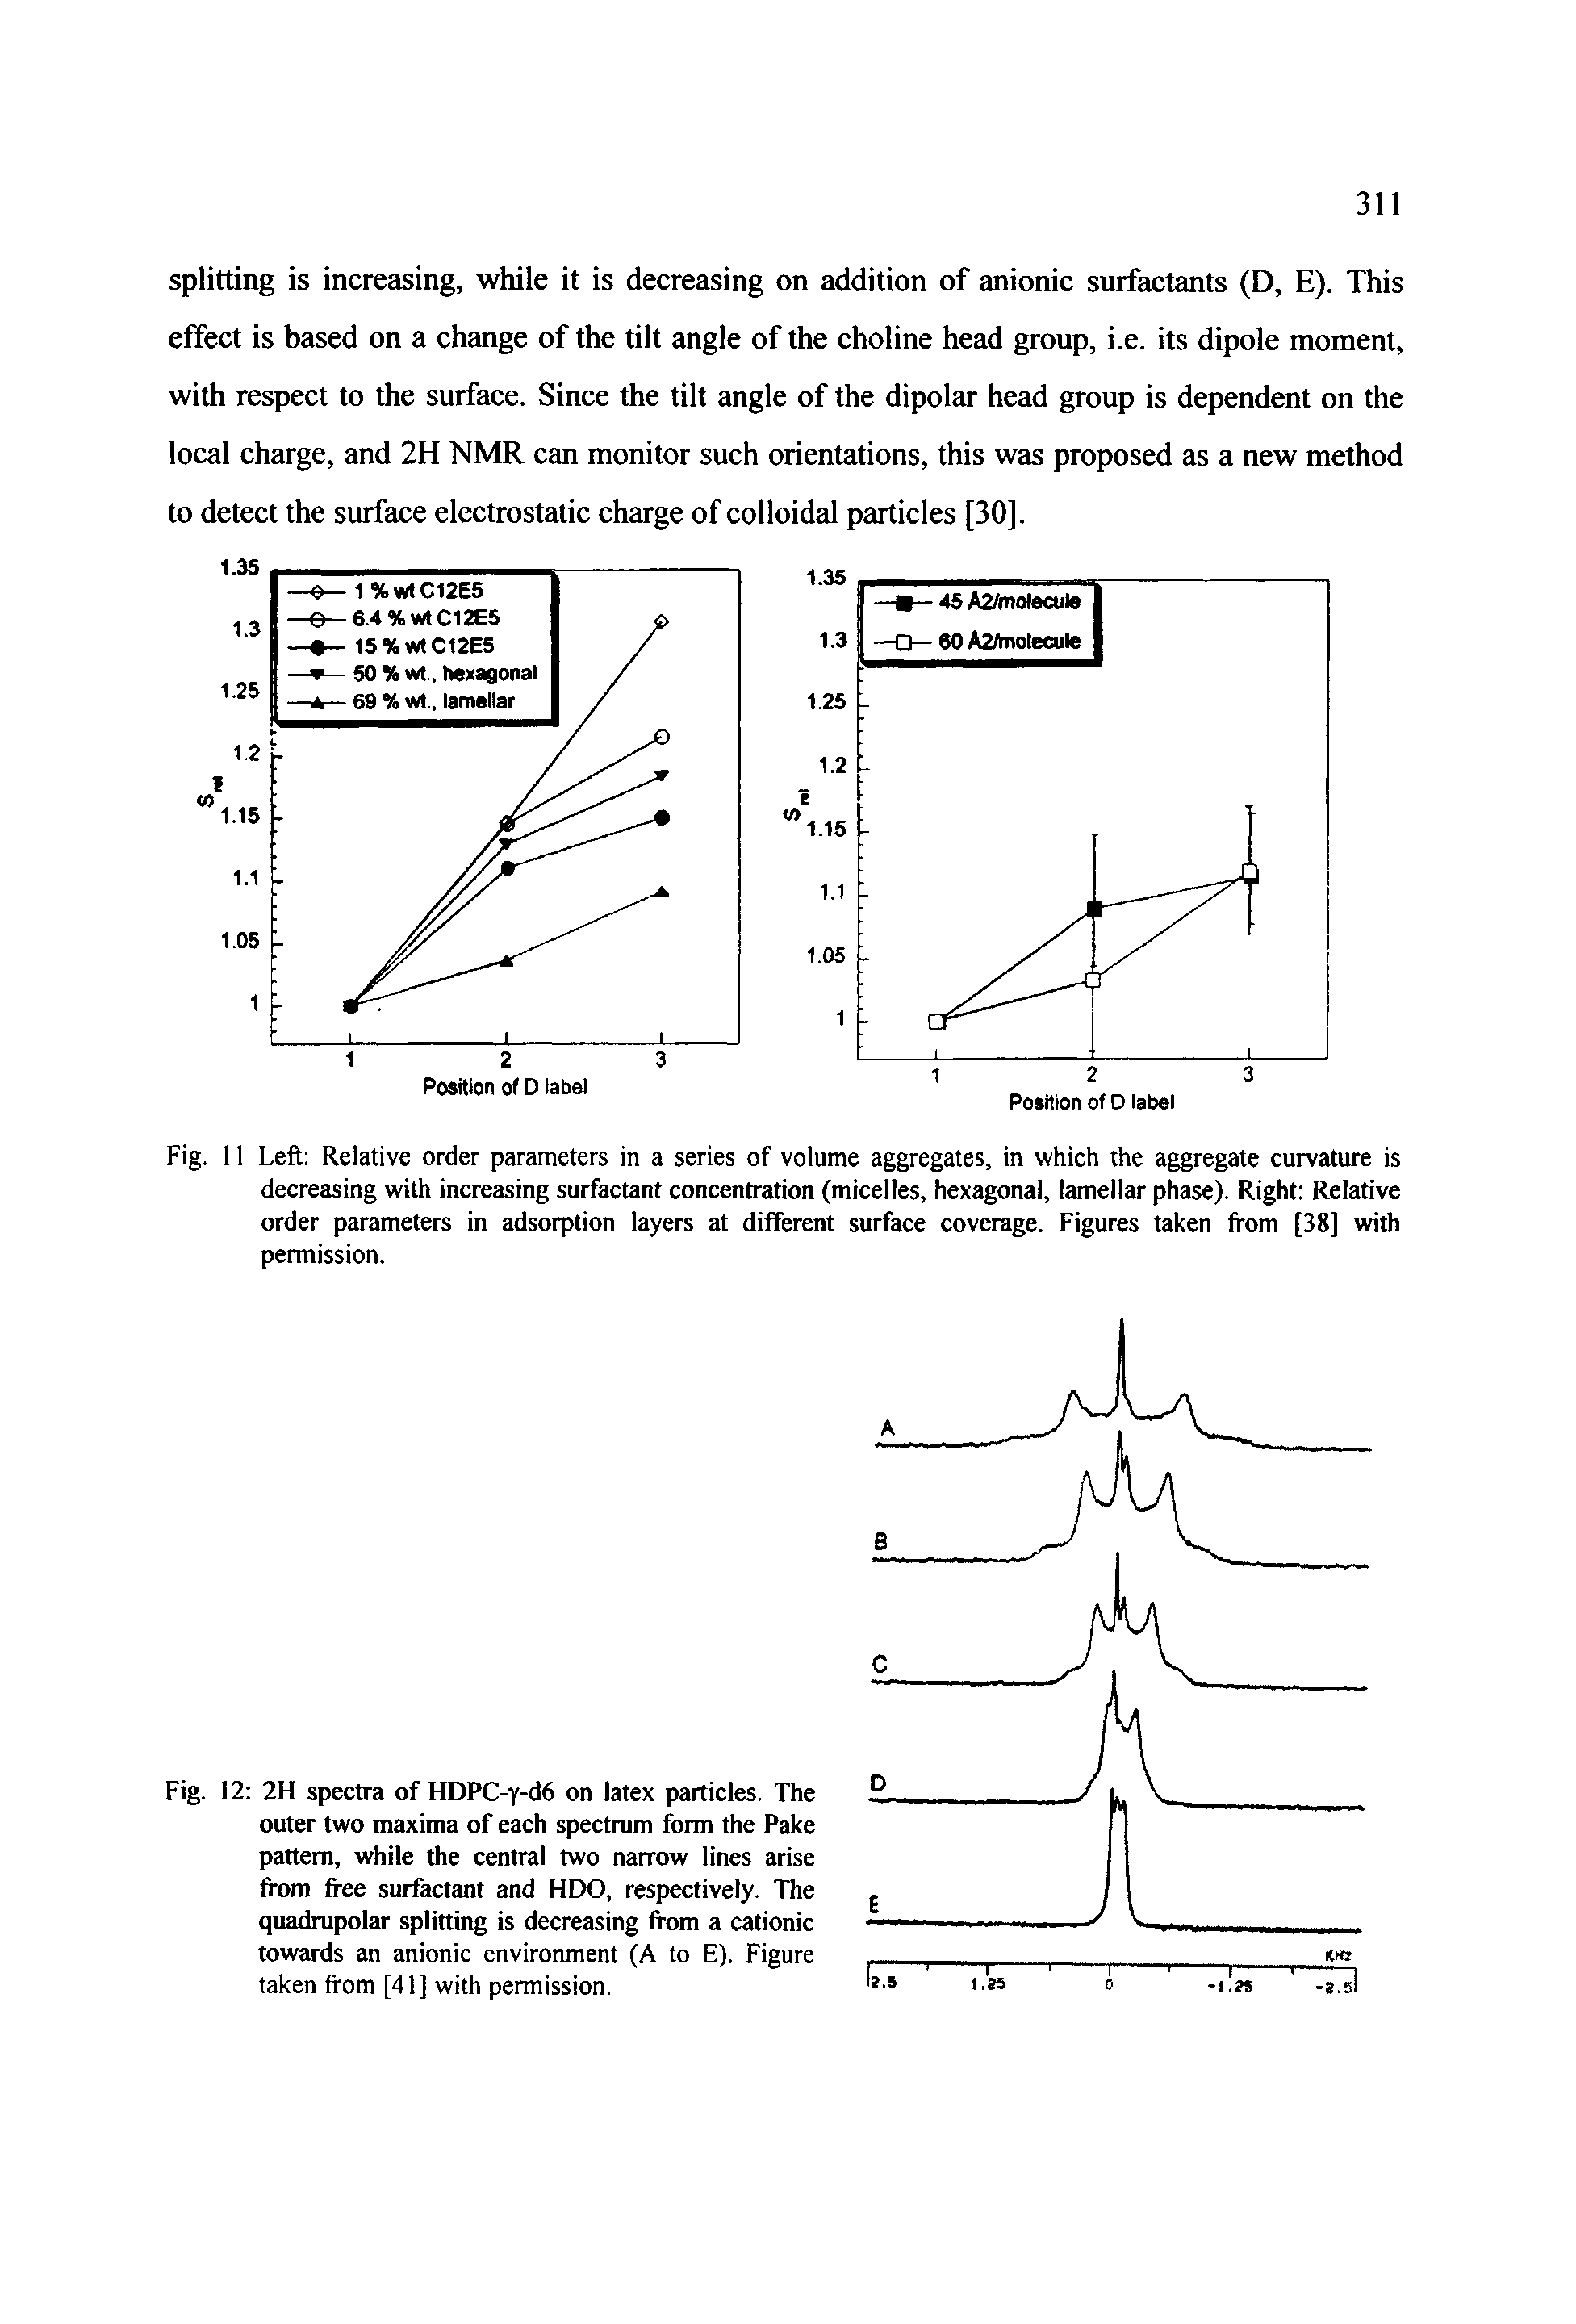 Fig. 11 Left Relative order parameters in a series of volume aggregates, in which the aggregate curvature is decreasing with increasing surfactant concentration (micelles, hexagonal, lamellar phase). Right Relative order parameters in adsorption layers at different surface coverage. Figures taken from [38] with permission.